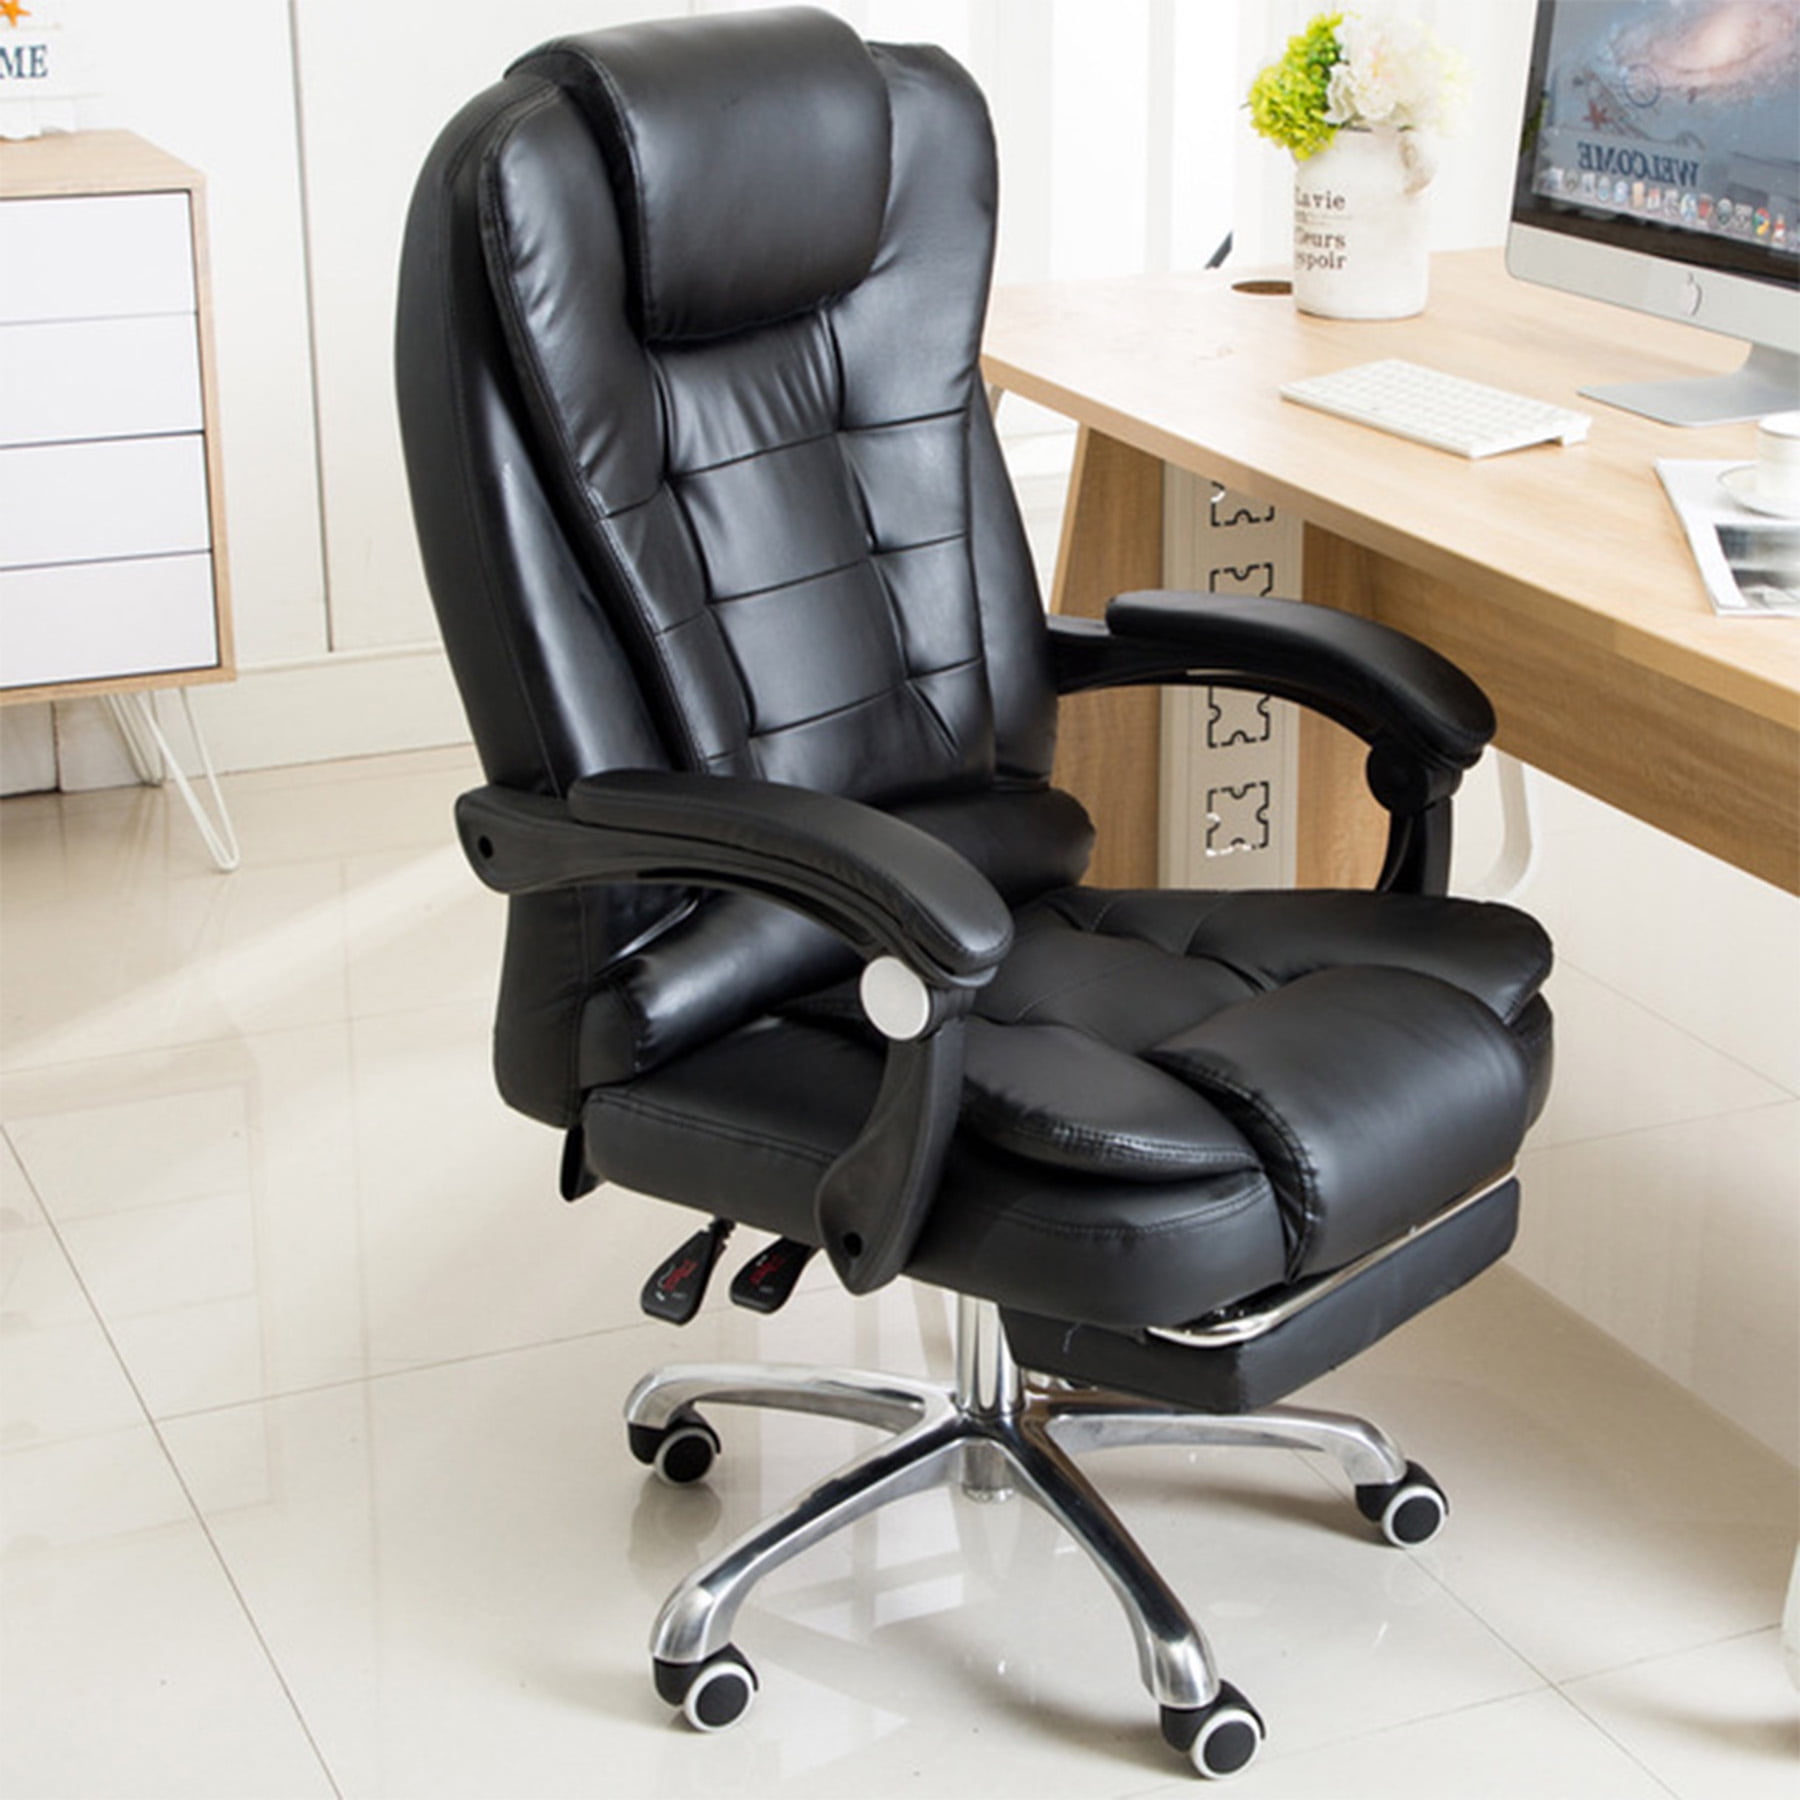 Ergonomic Reclining Massage Office Computer Chair Gaming Chair w/ Footrest new 